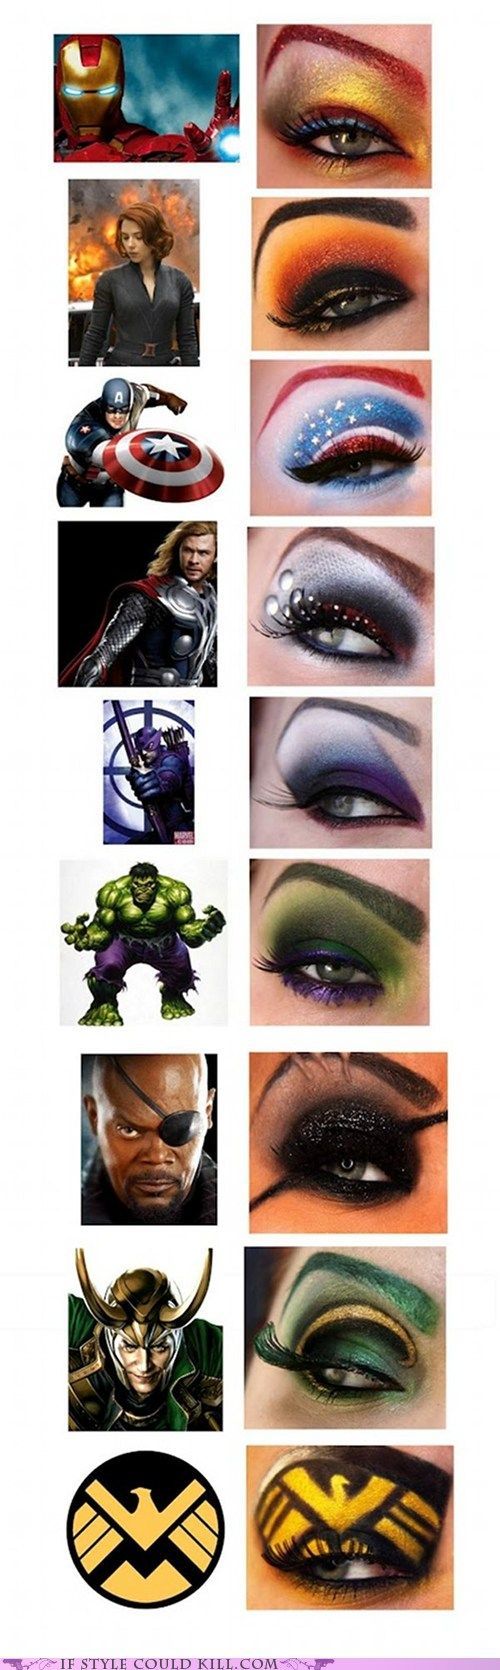 Different Make-up ideas for Halloween